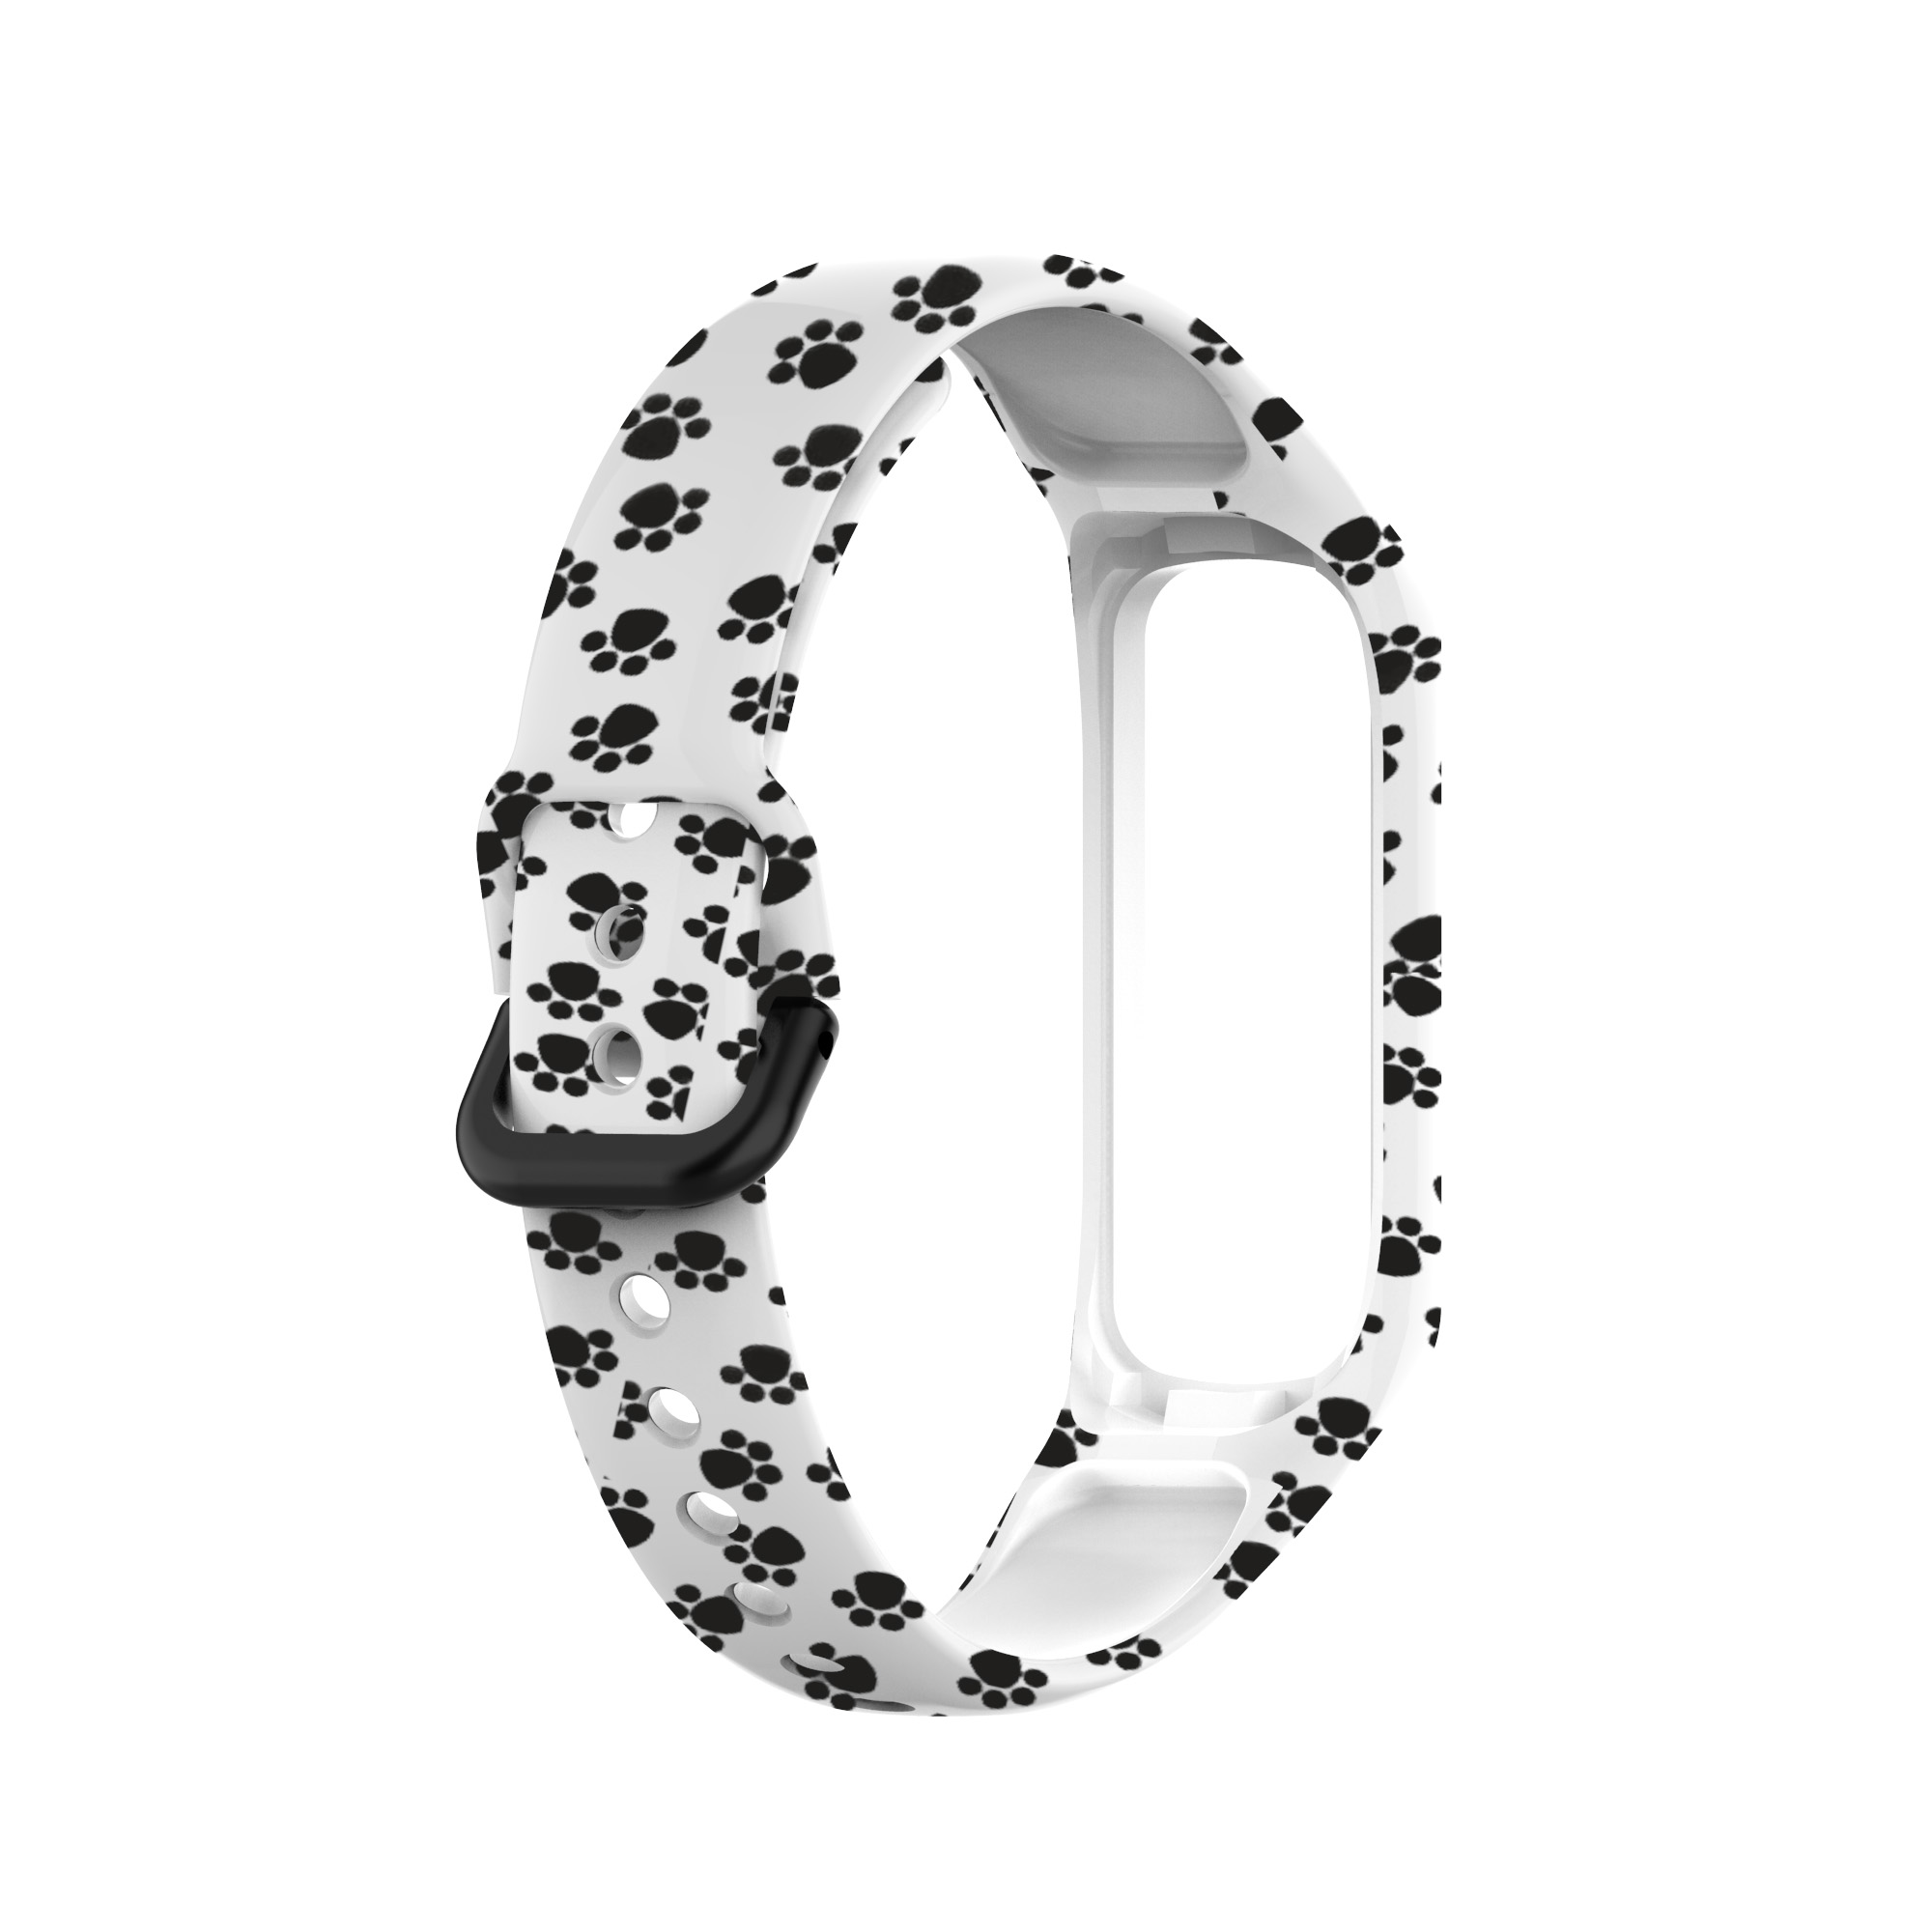 Bakeey-Printed-Pattern-Stainless-Steel-Buckle-Smart-watch-Band-Replacement-Strap-For-Samsung-Galaxy--1806217-8